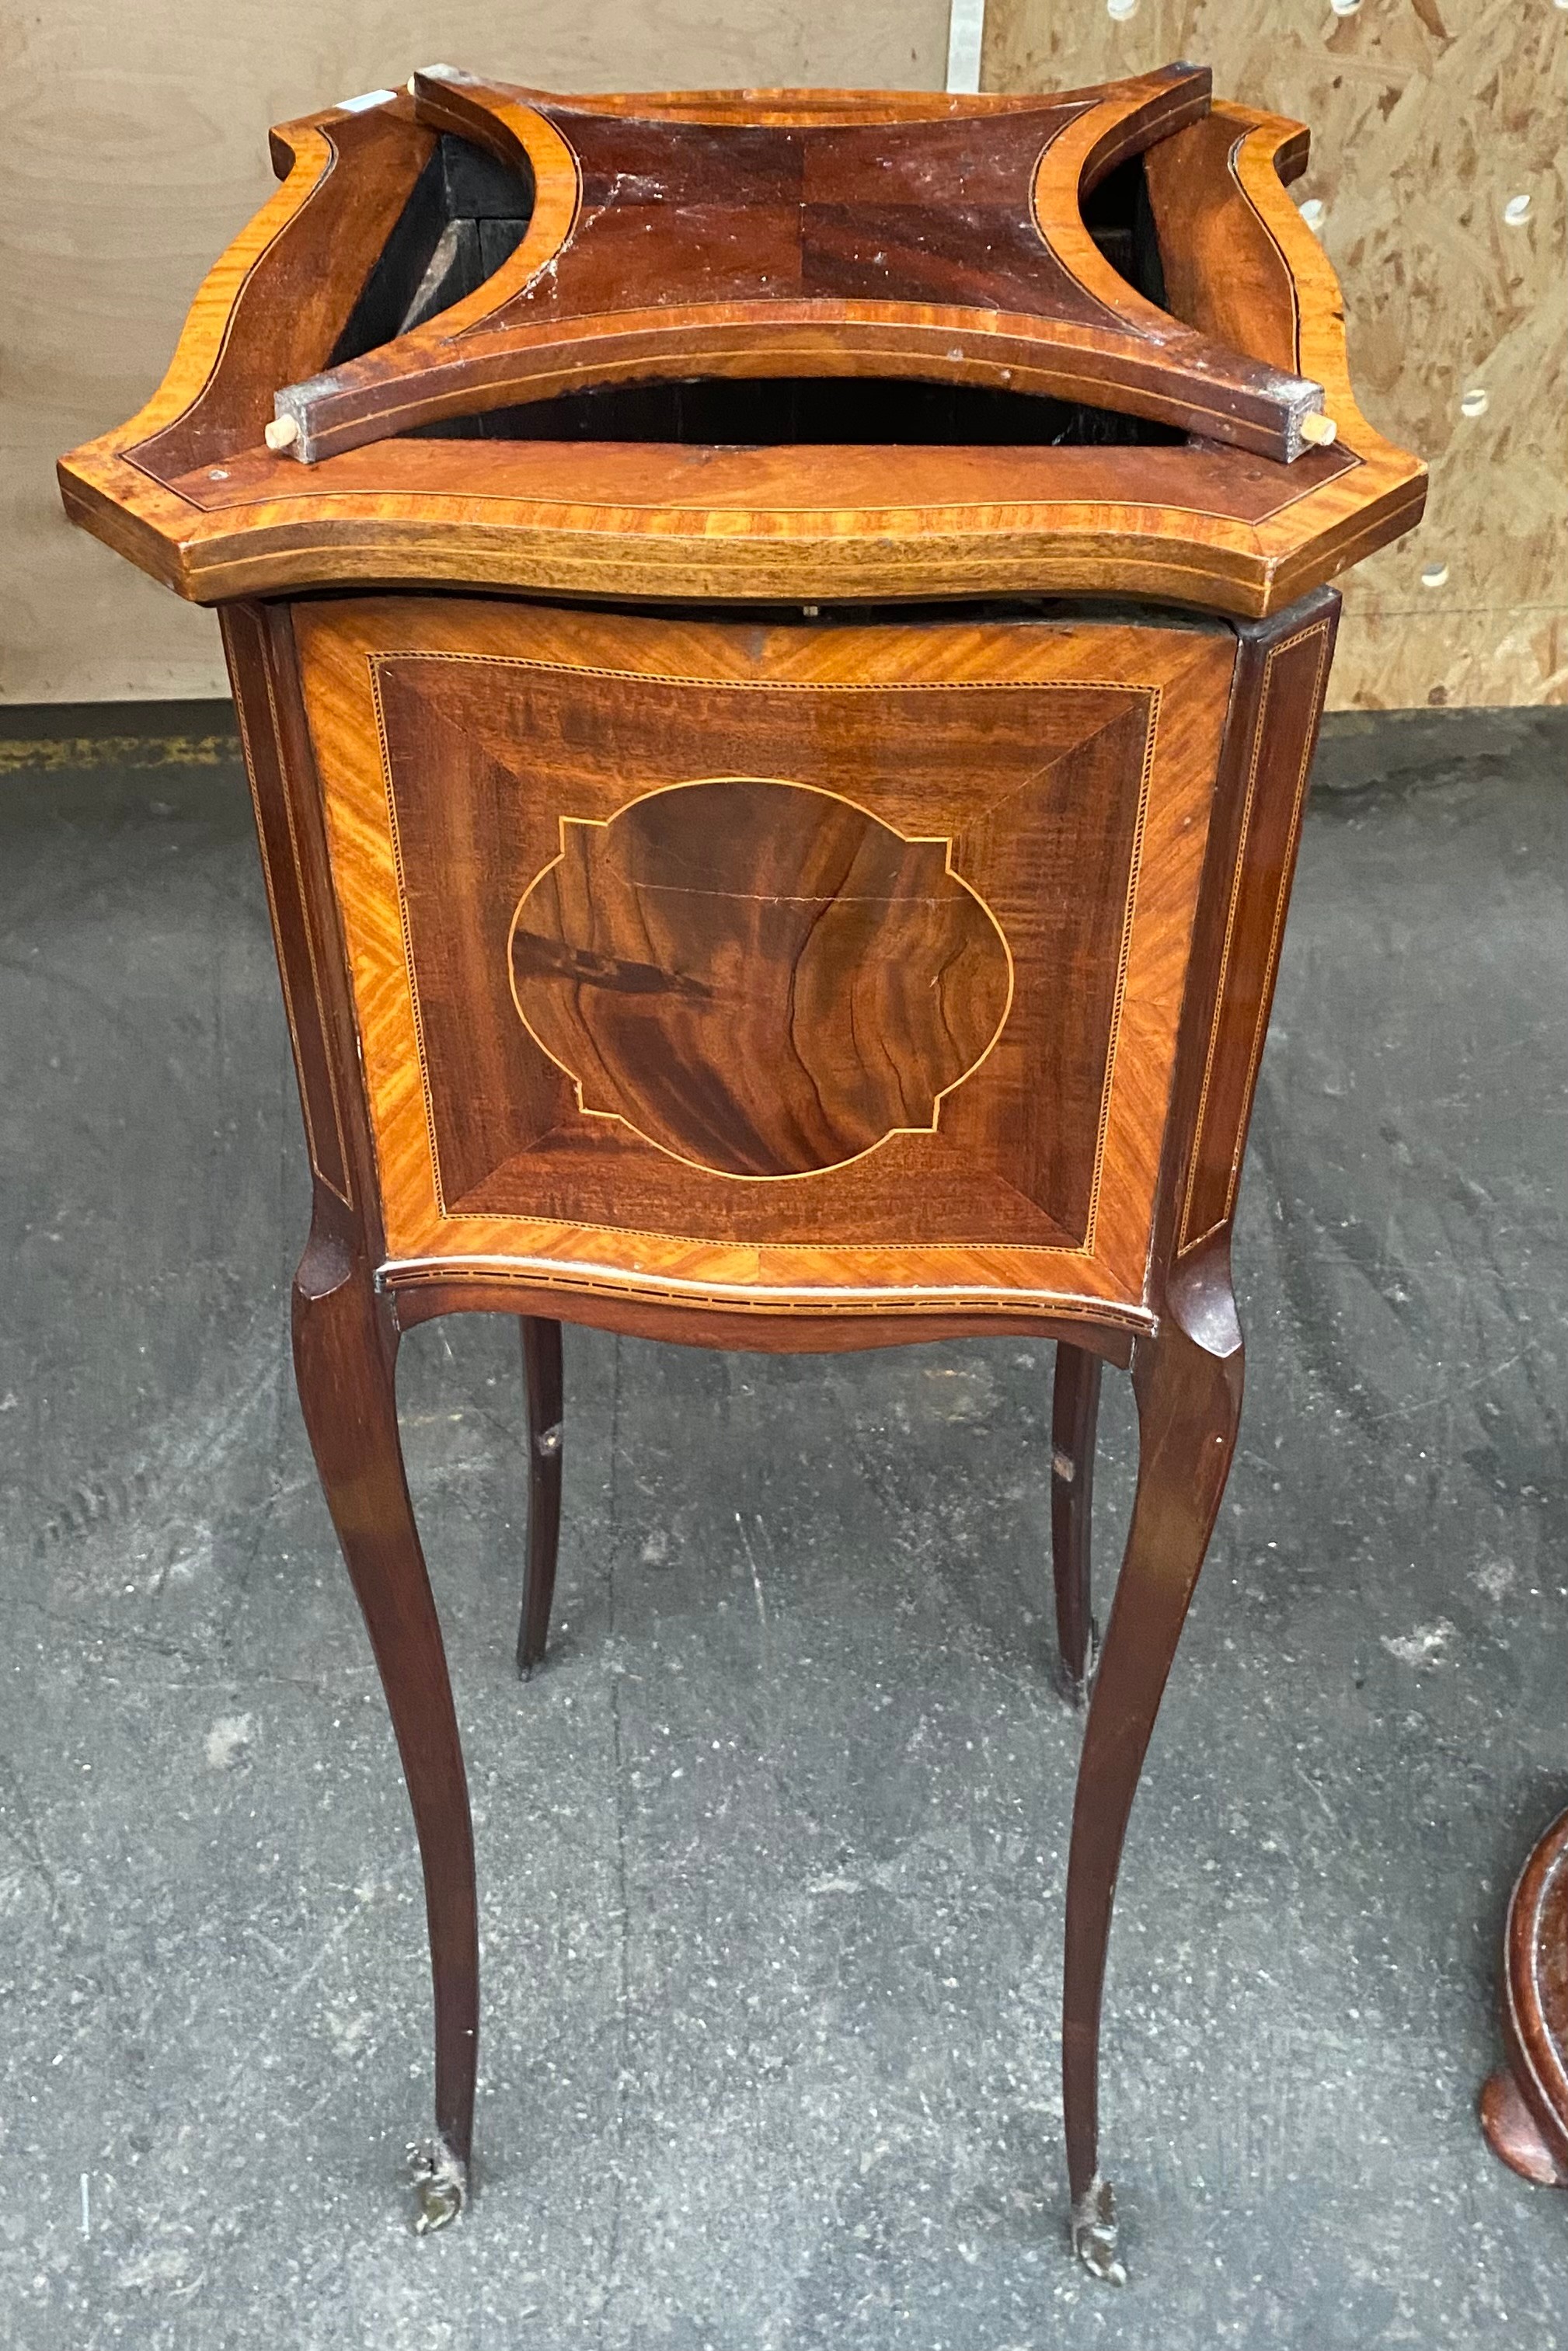 Edwardian inlaid plant stand along with 1900s standard floor light [33x33x93cm] [needs attention] - Image 2 of 3